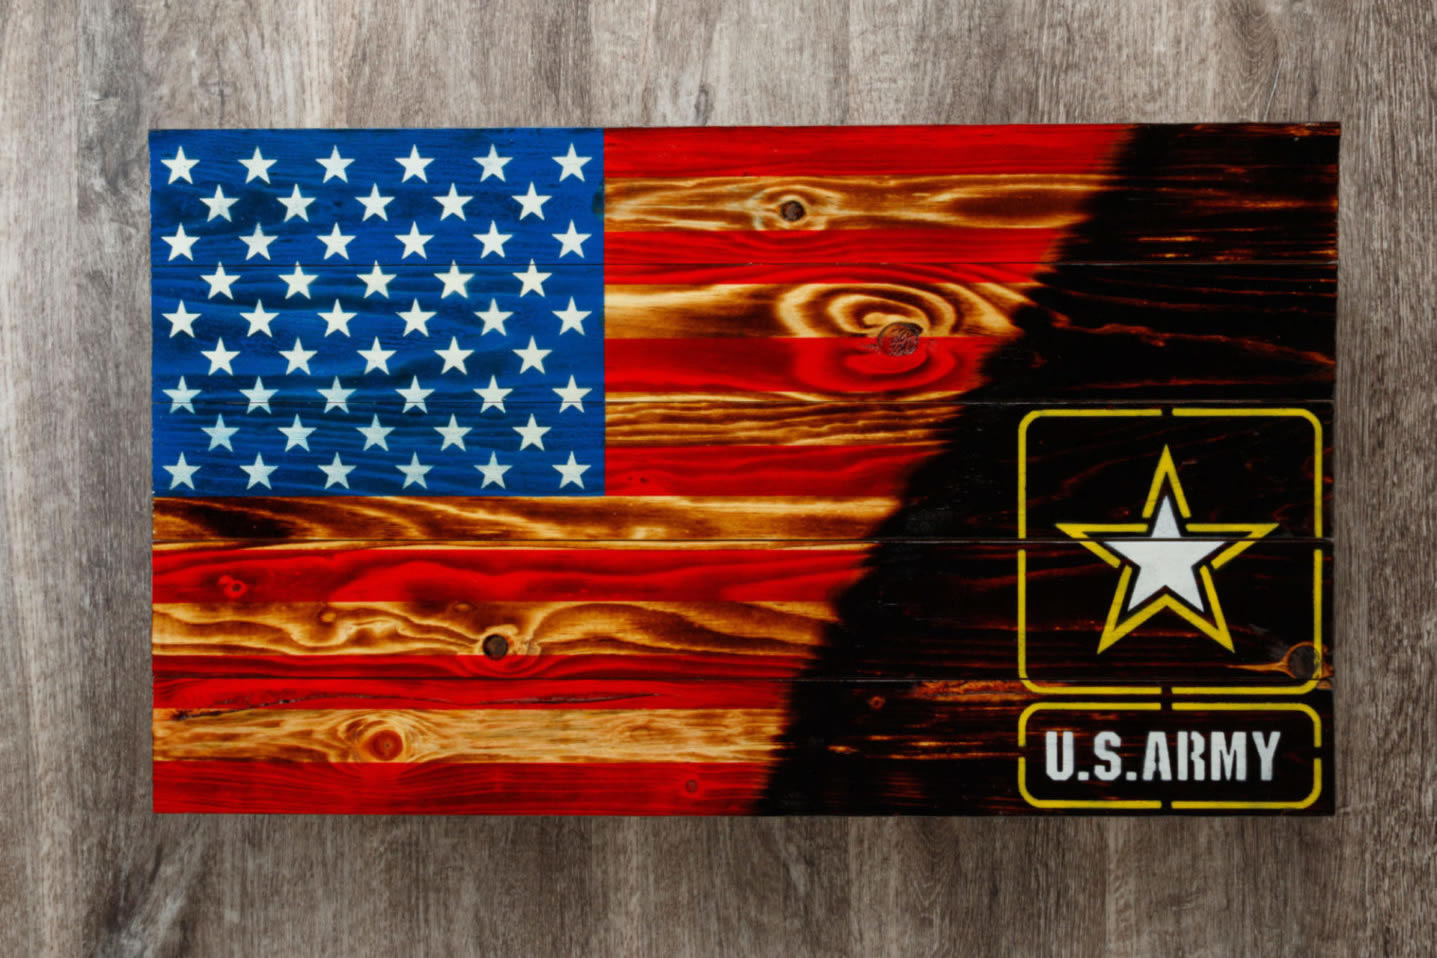 Wooden army flag torched